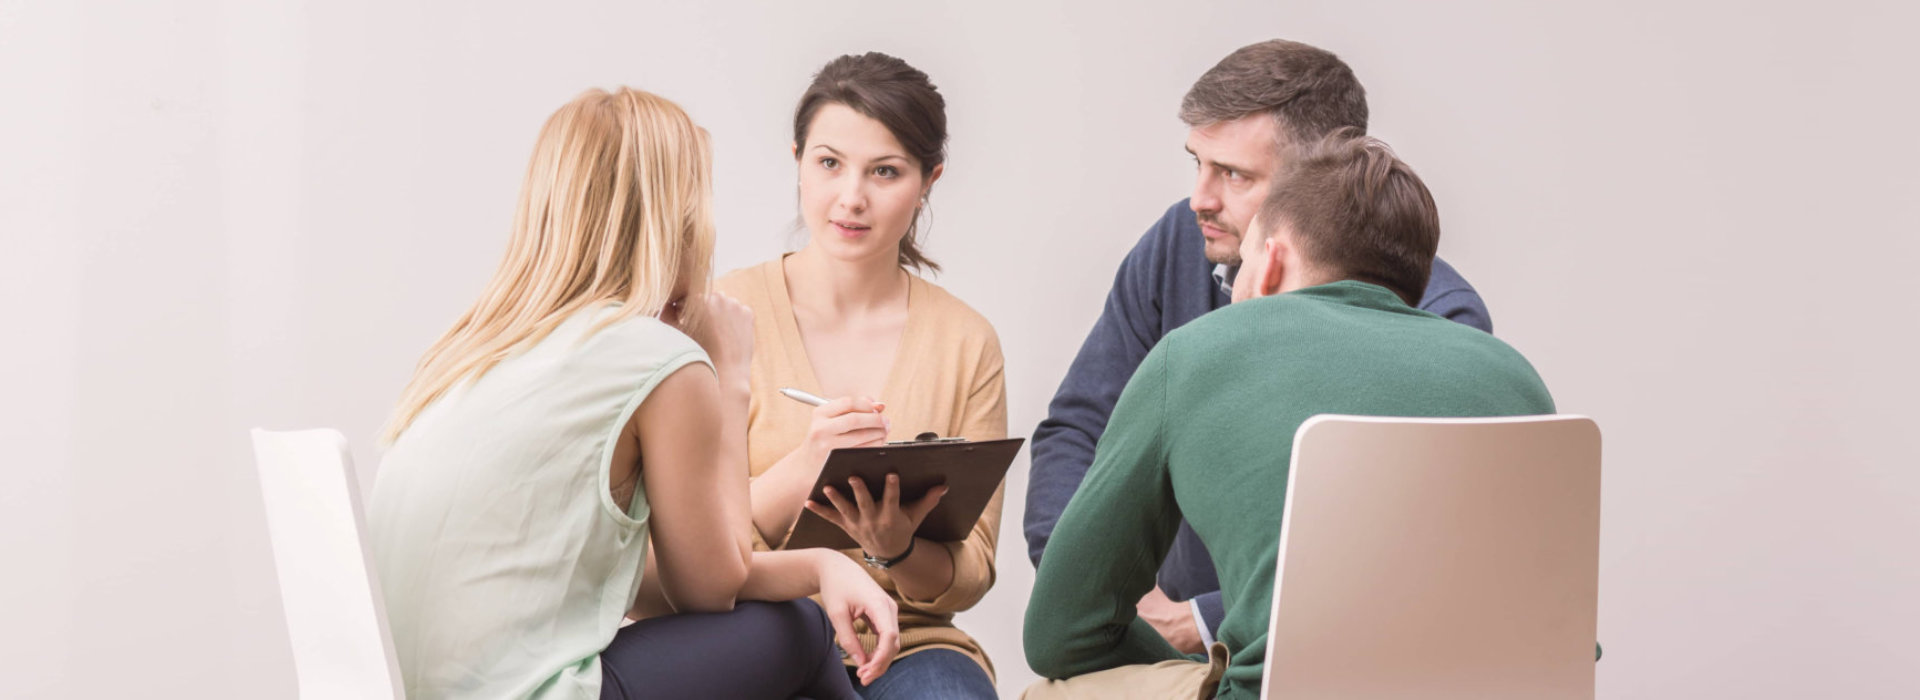 group of people talking to a counselor